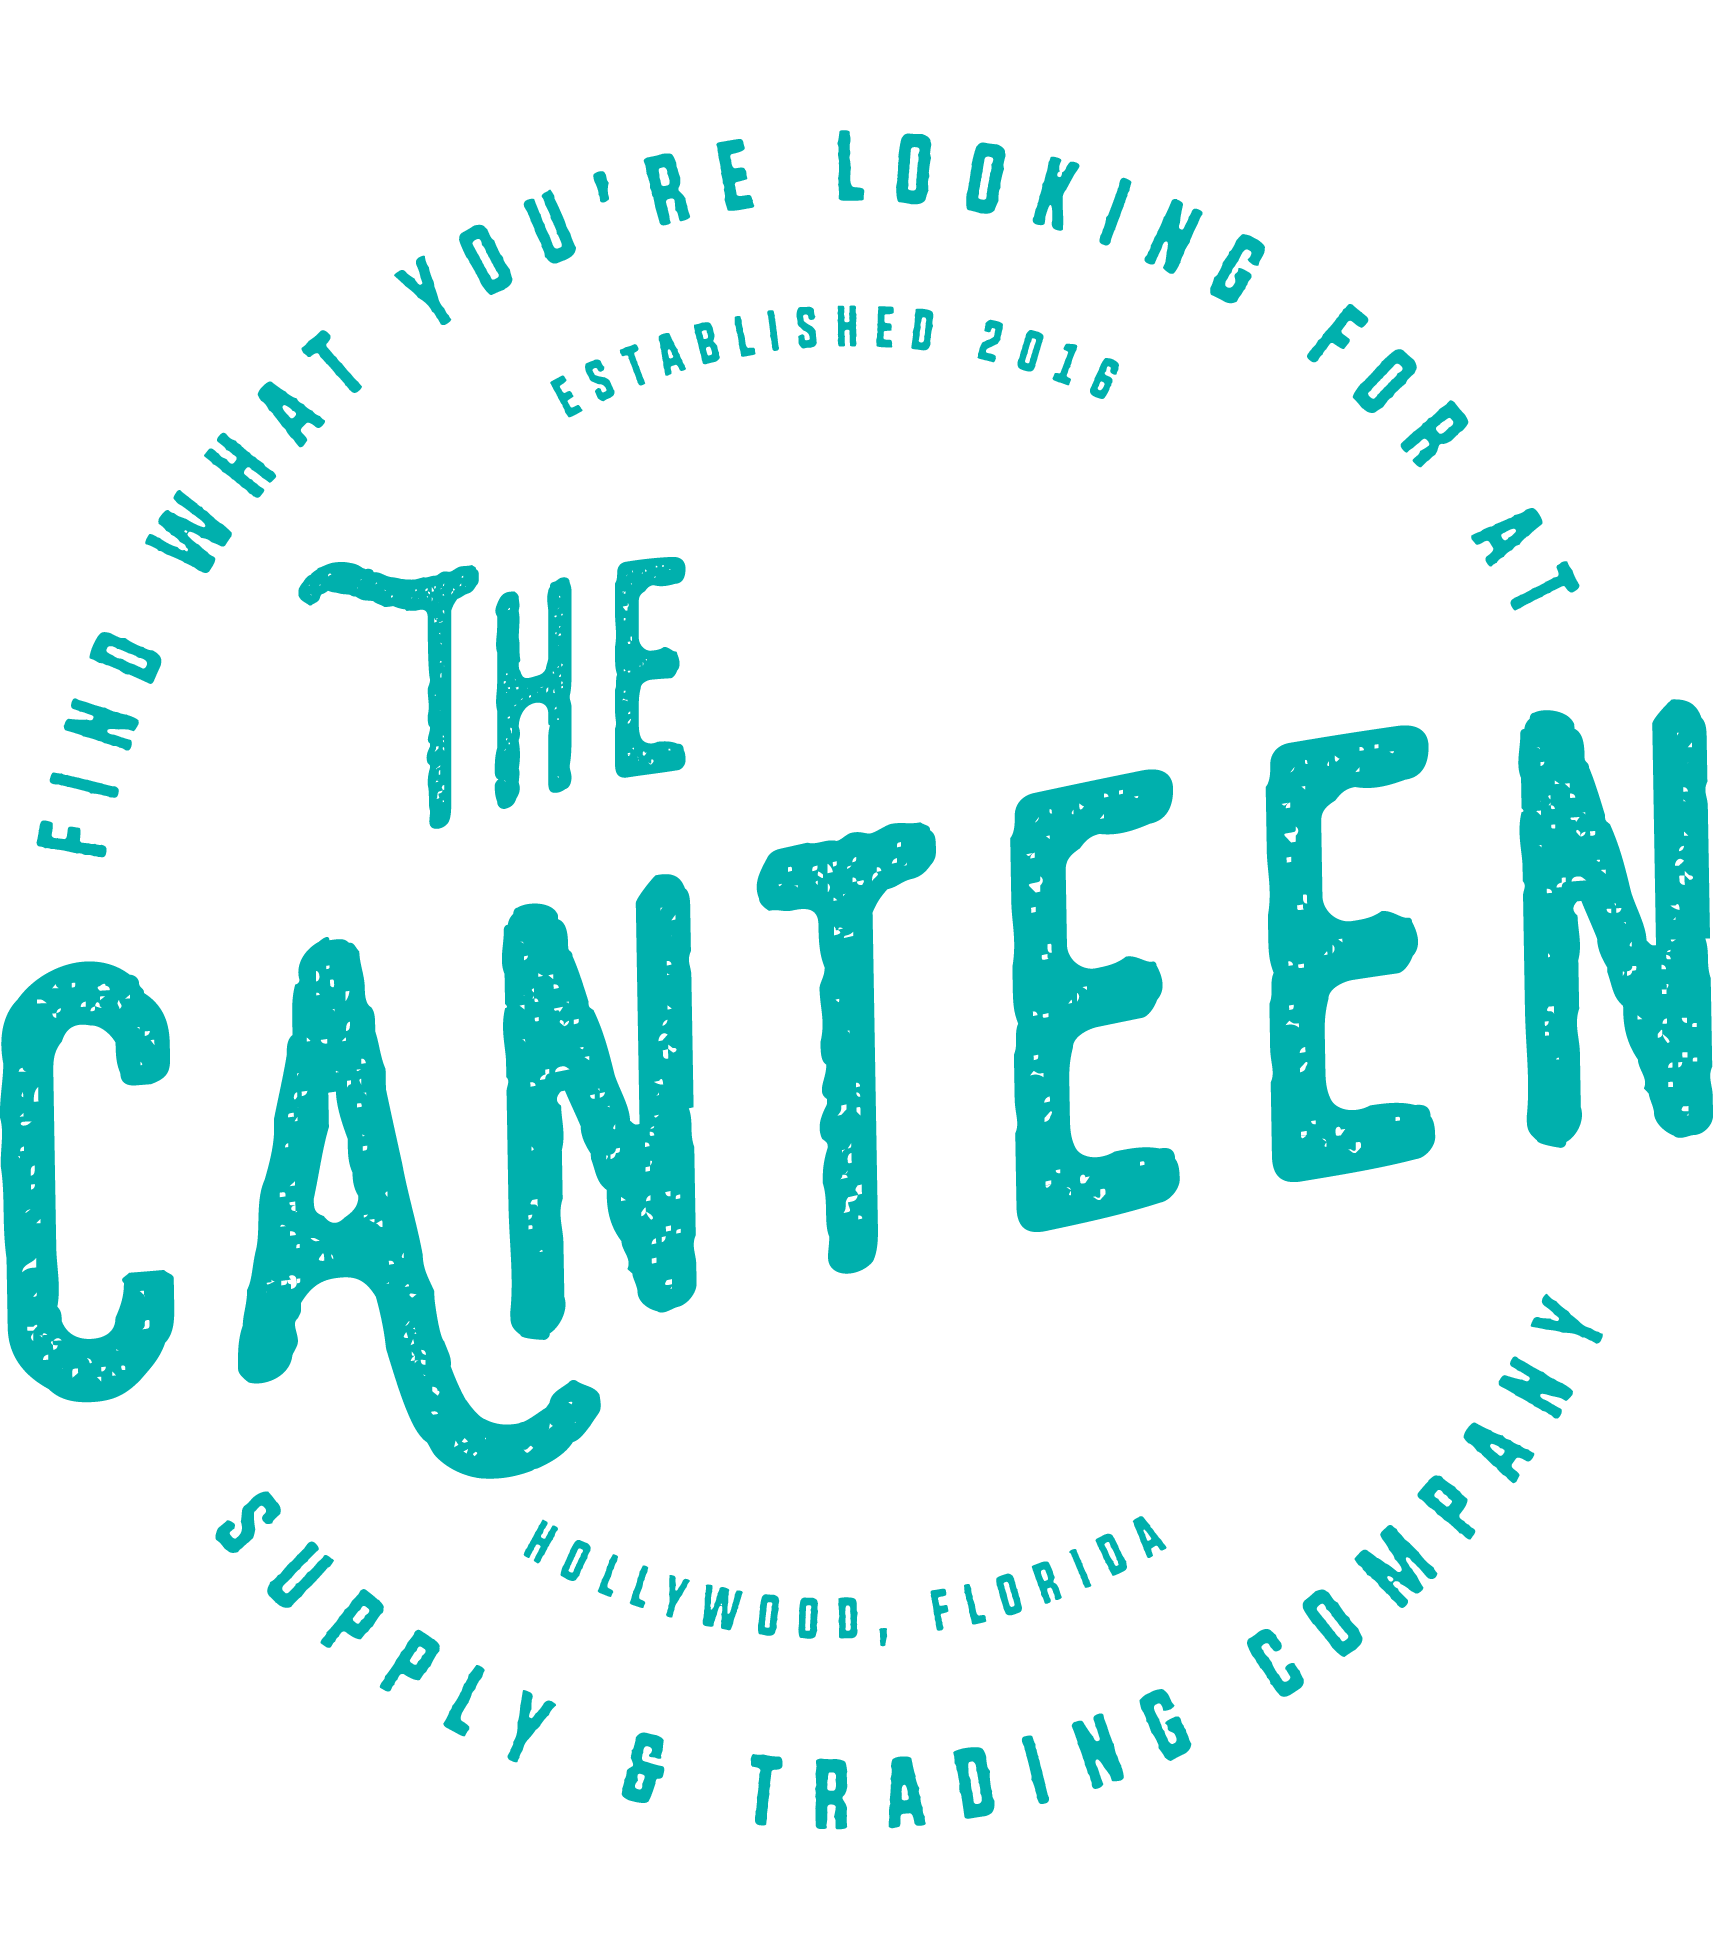 The Canteen Logo used at The Diplomat Resort